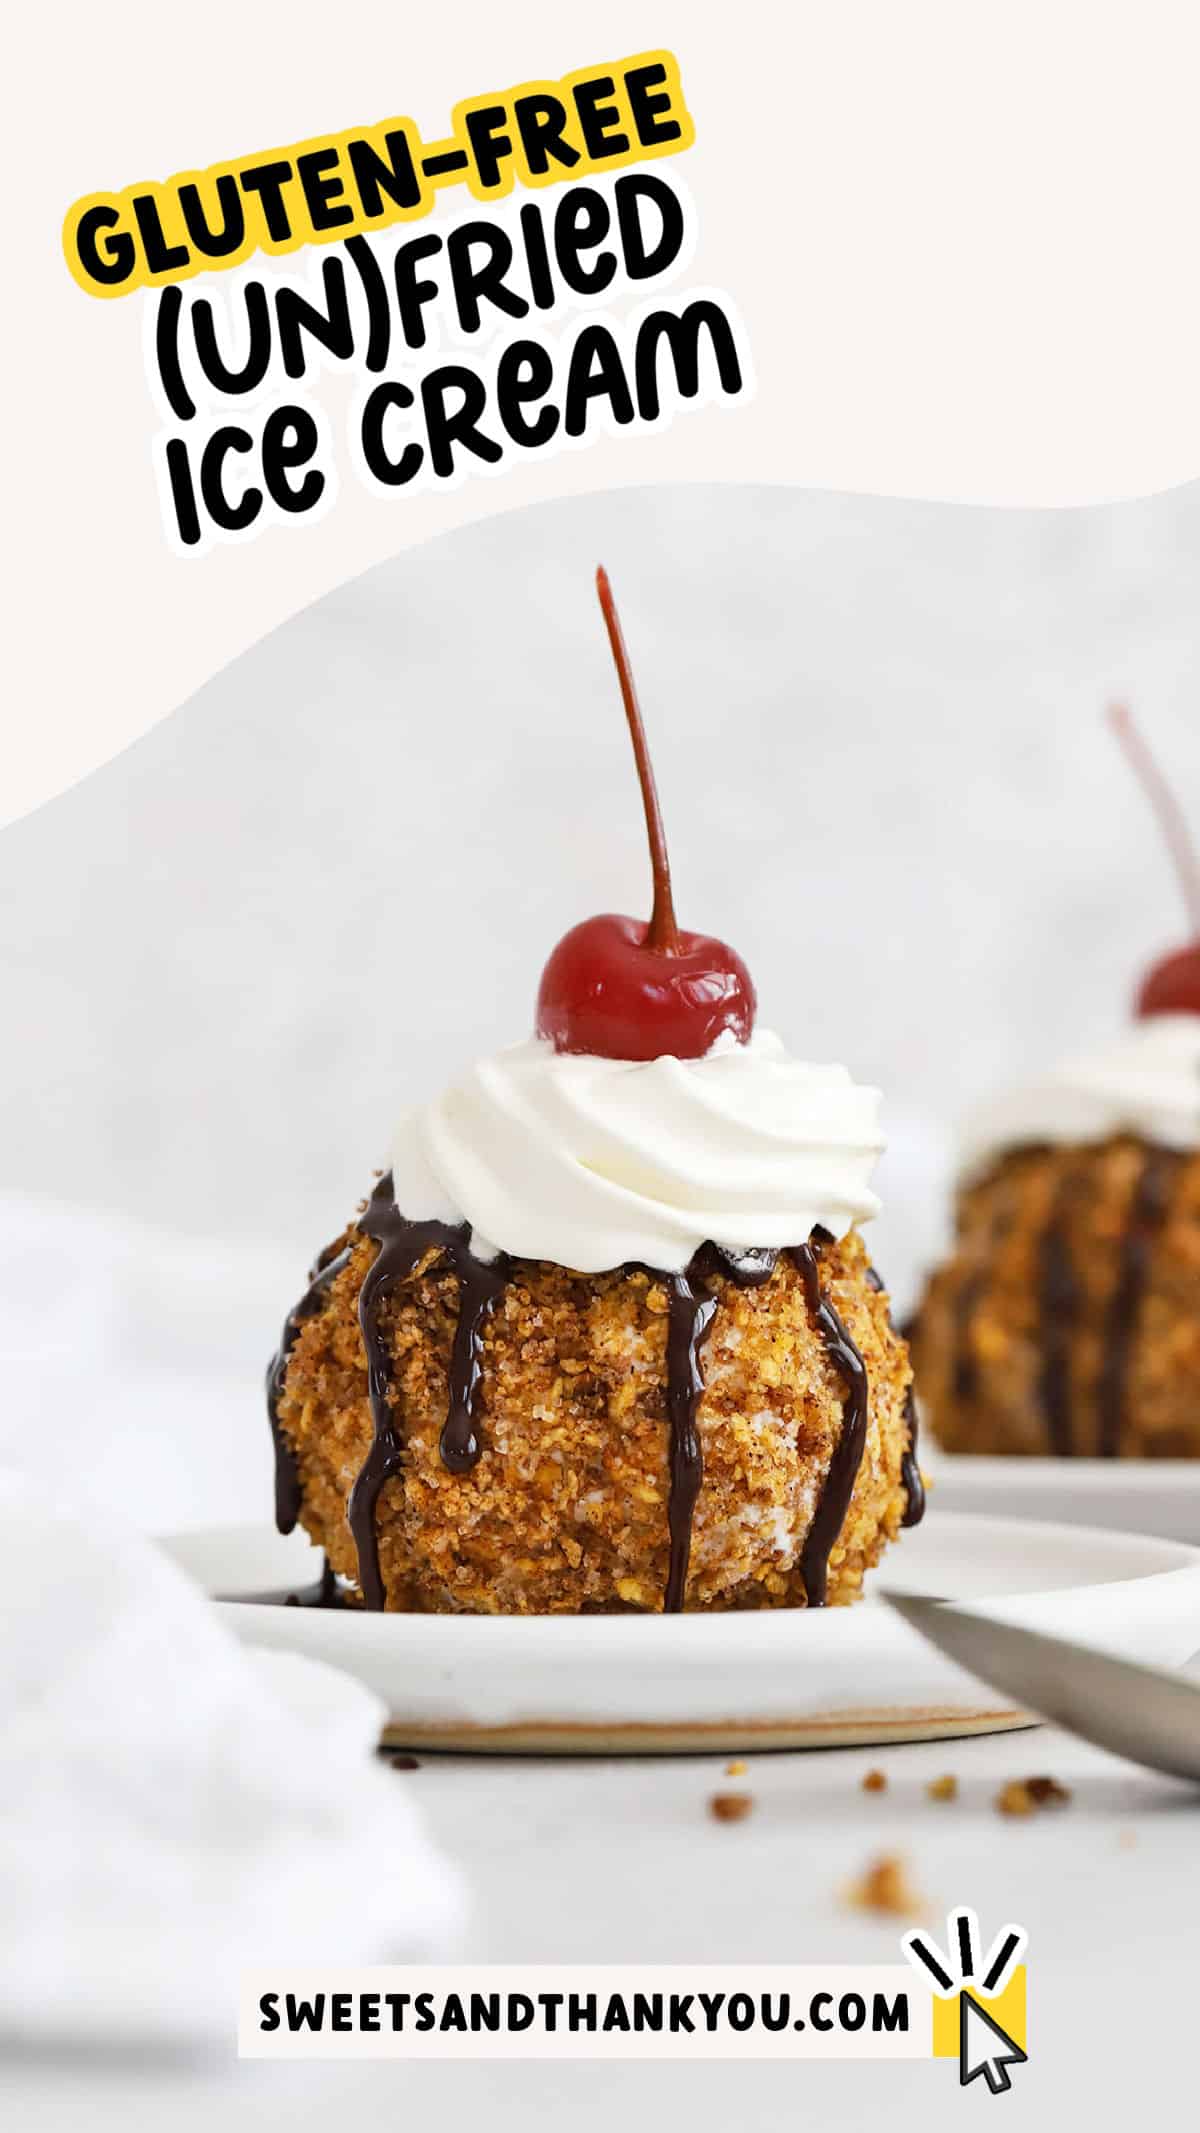 Our (un-fried) gluten-free fried ice cream recipe is the perfect ice cream dessert to cool off with--no frying required! You'll love the cinnamon-y crunch of the coating with the creamy ice cream! Try this as a Tex-Mex dessert to finish a taco night or serve it up as a fun summer dessert to cool off with. This easy no-bake dessert is simple to make and even more fun to eat! Get the recipe and our favorite toppings at sweetsandthankyou.com